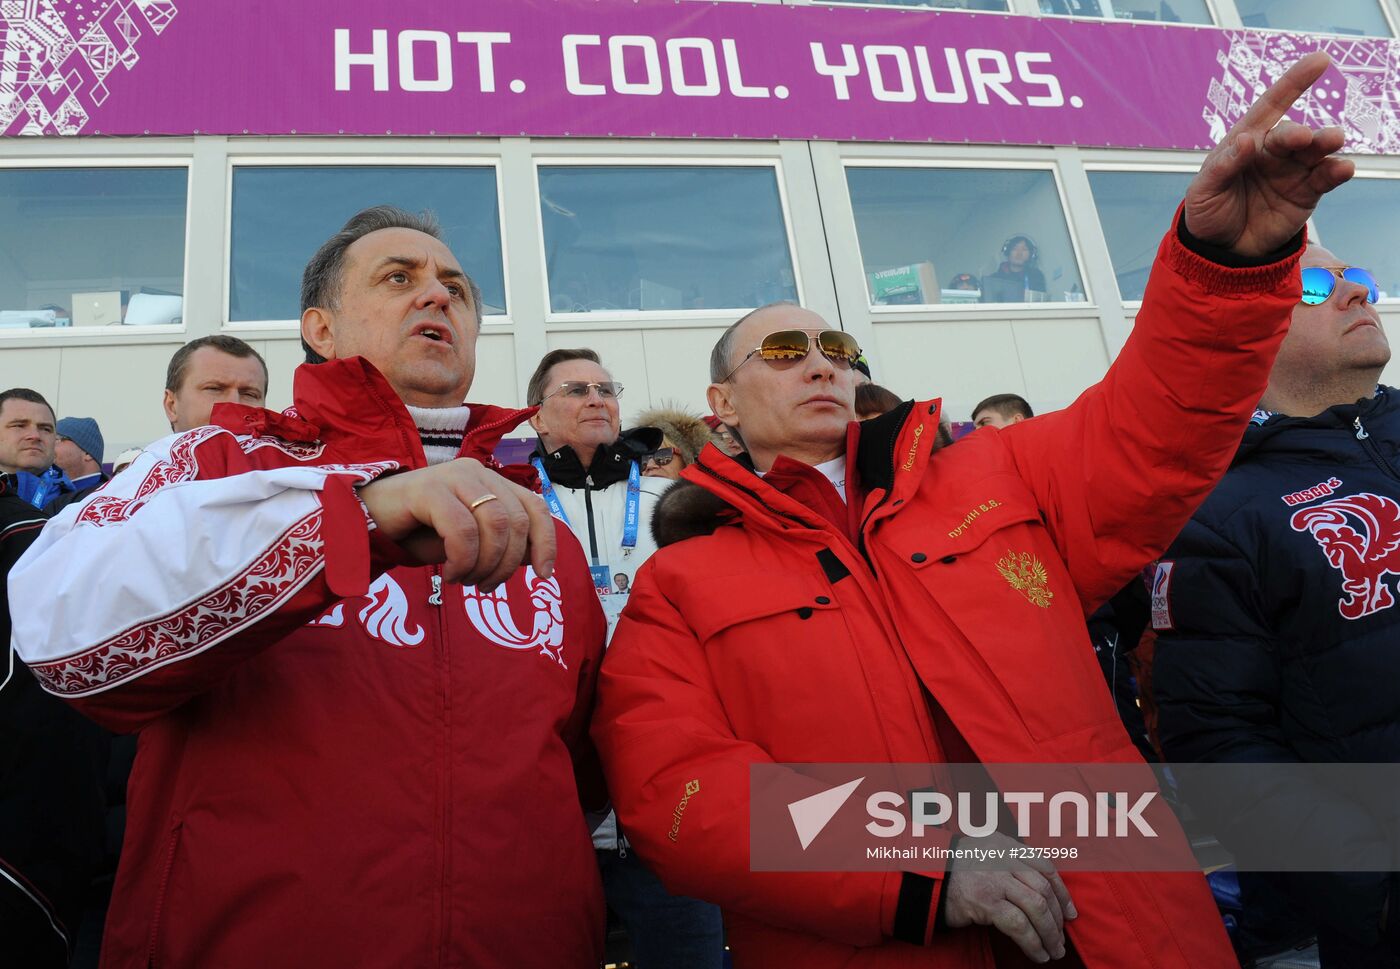 V.Putin and D.Medvedev attend Olympic cross-country skiing competition in Sochi